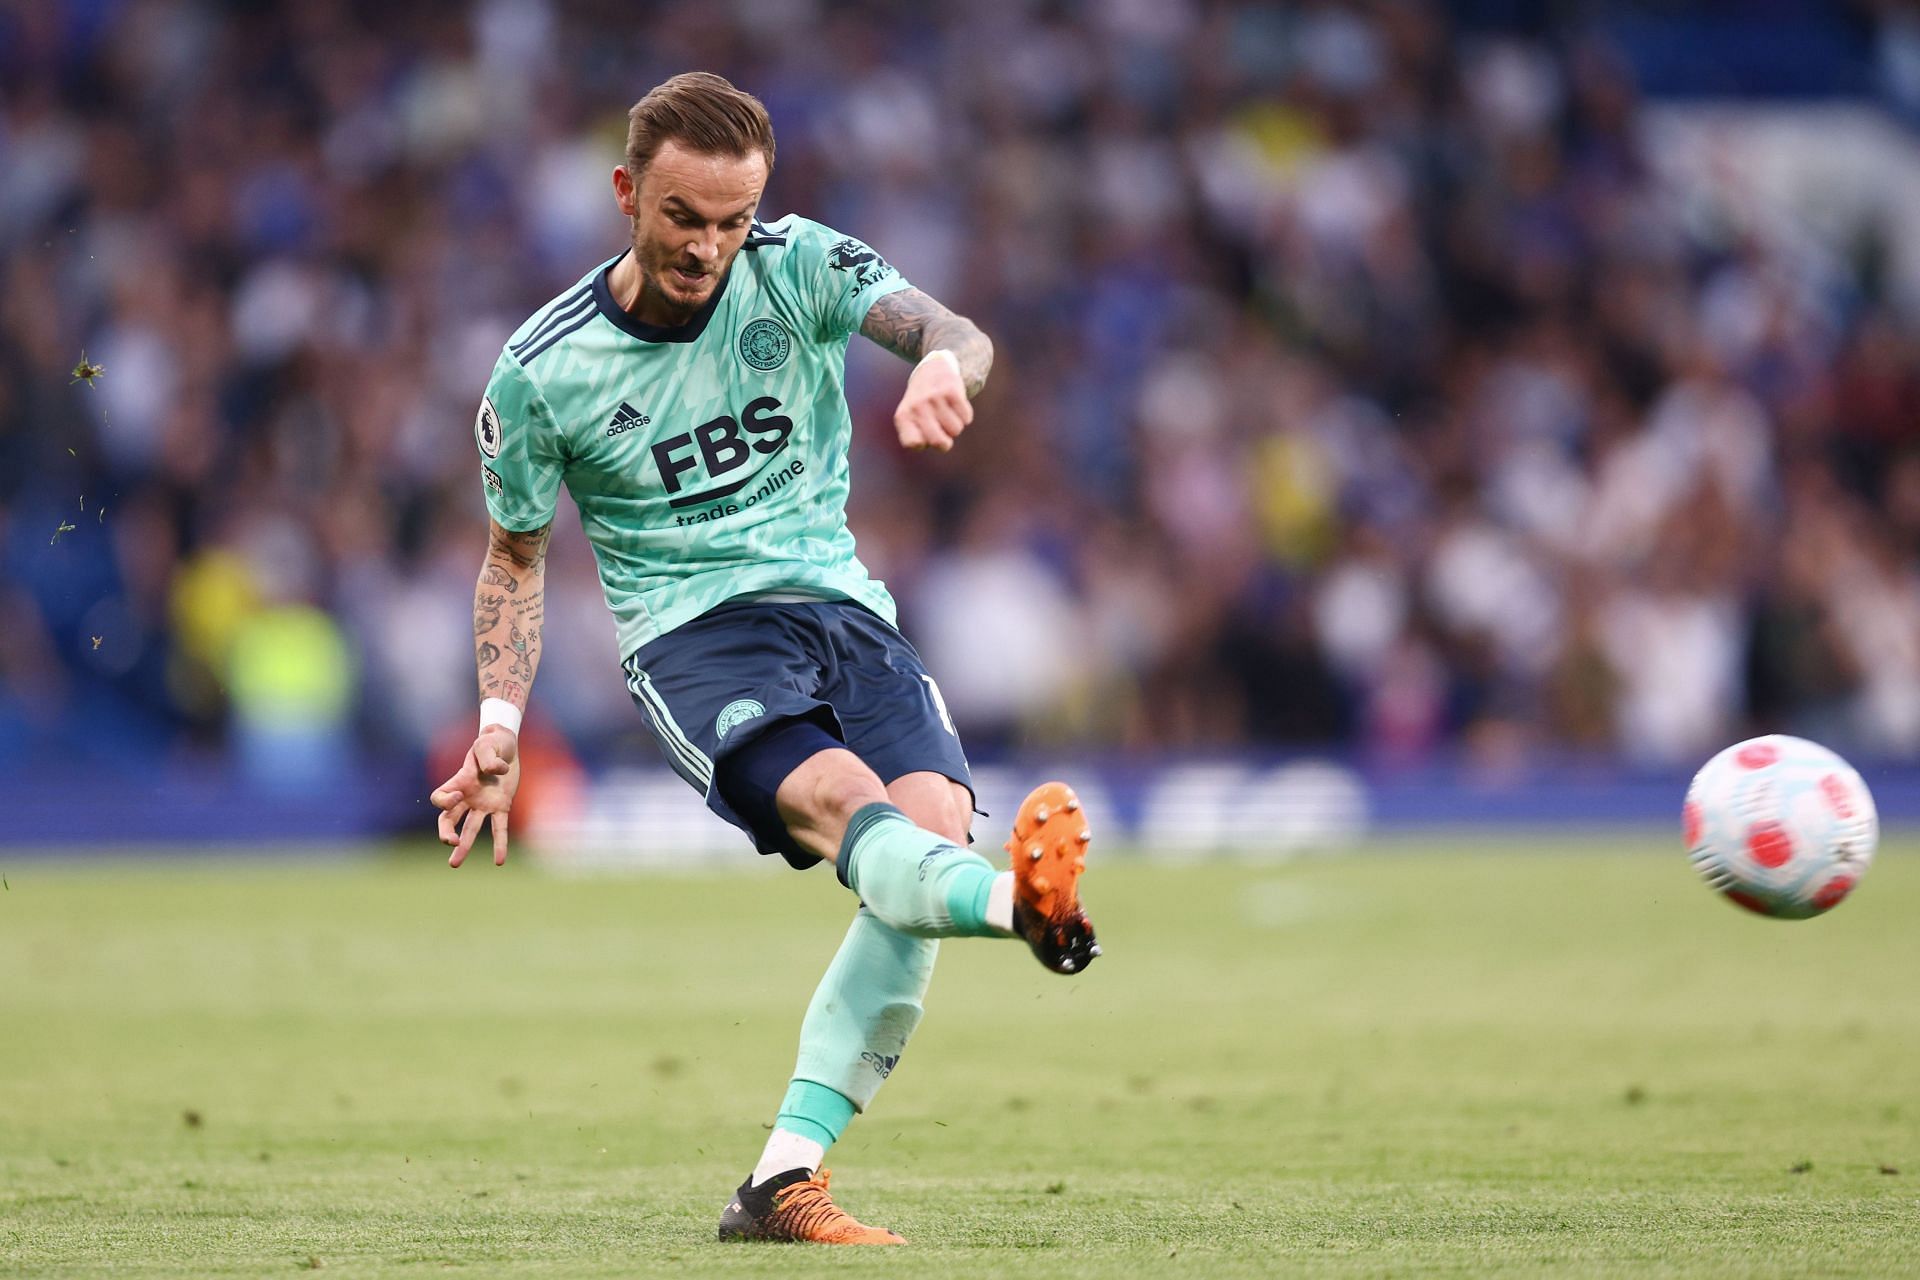 James Maddison is making his case for the World Cup squad